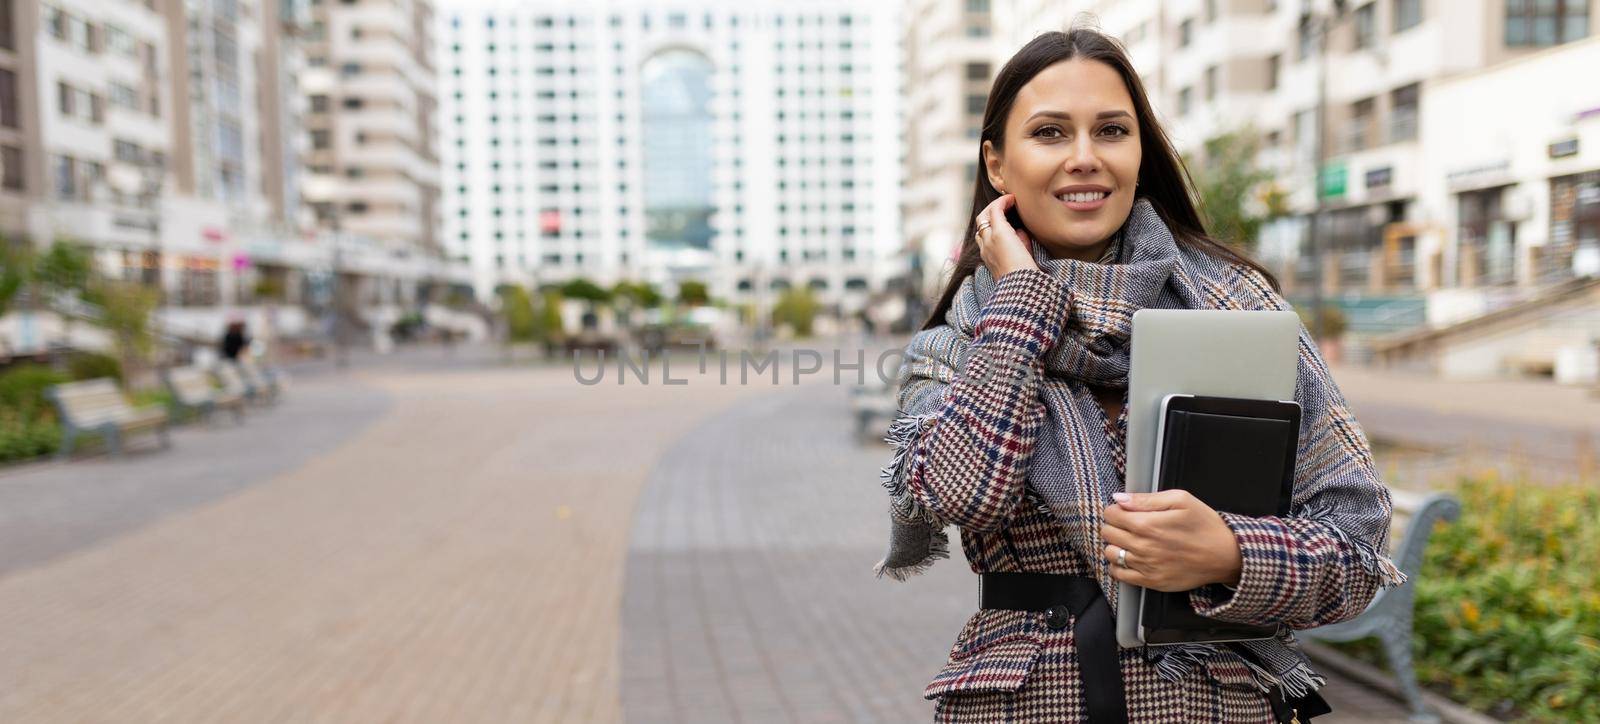 portrait of a successful woman entrepreneur on the background of a residential area.